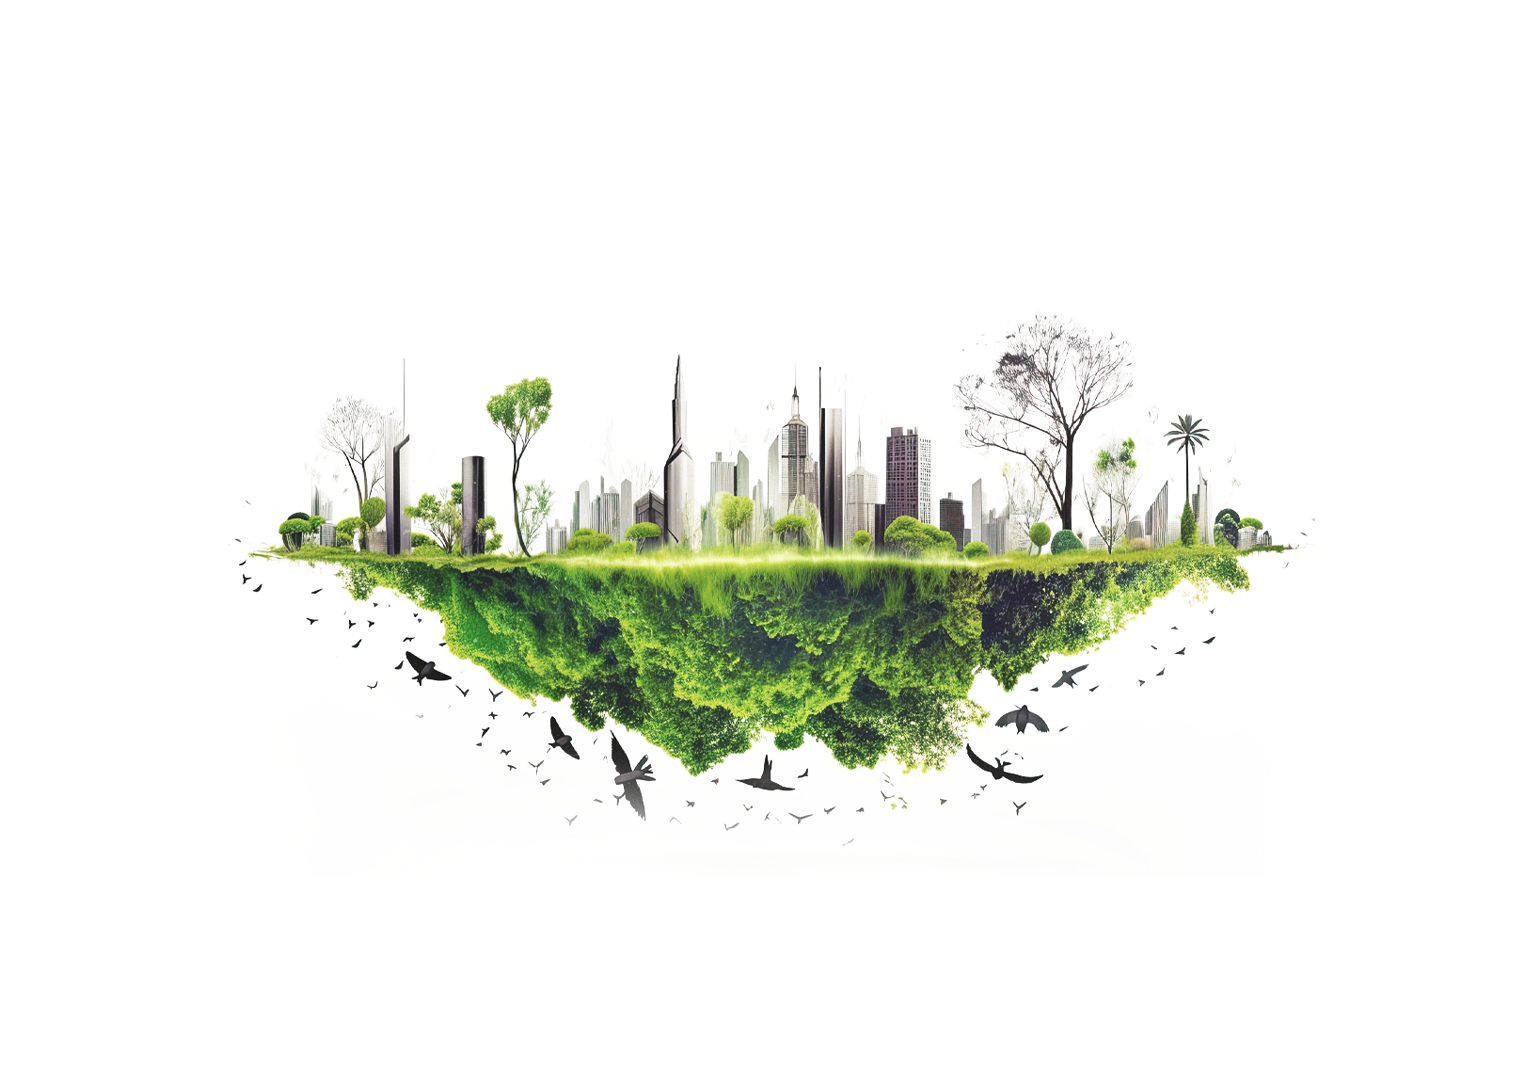 Green Economy as a Solution for Improving Population Health